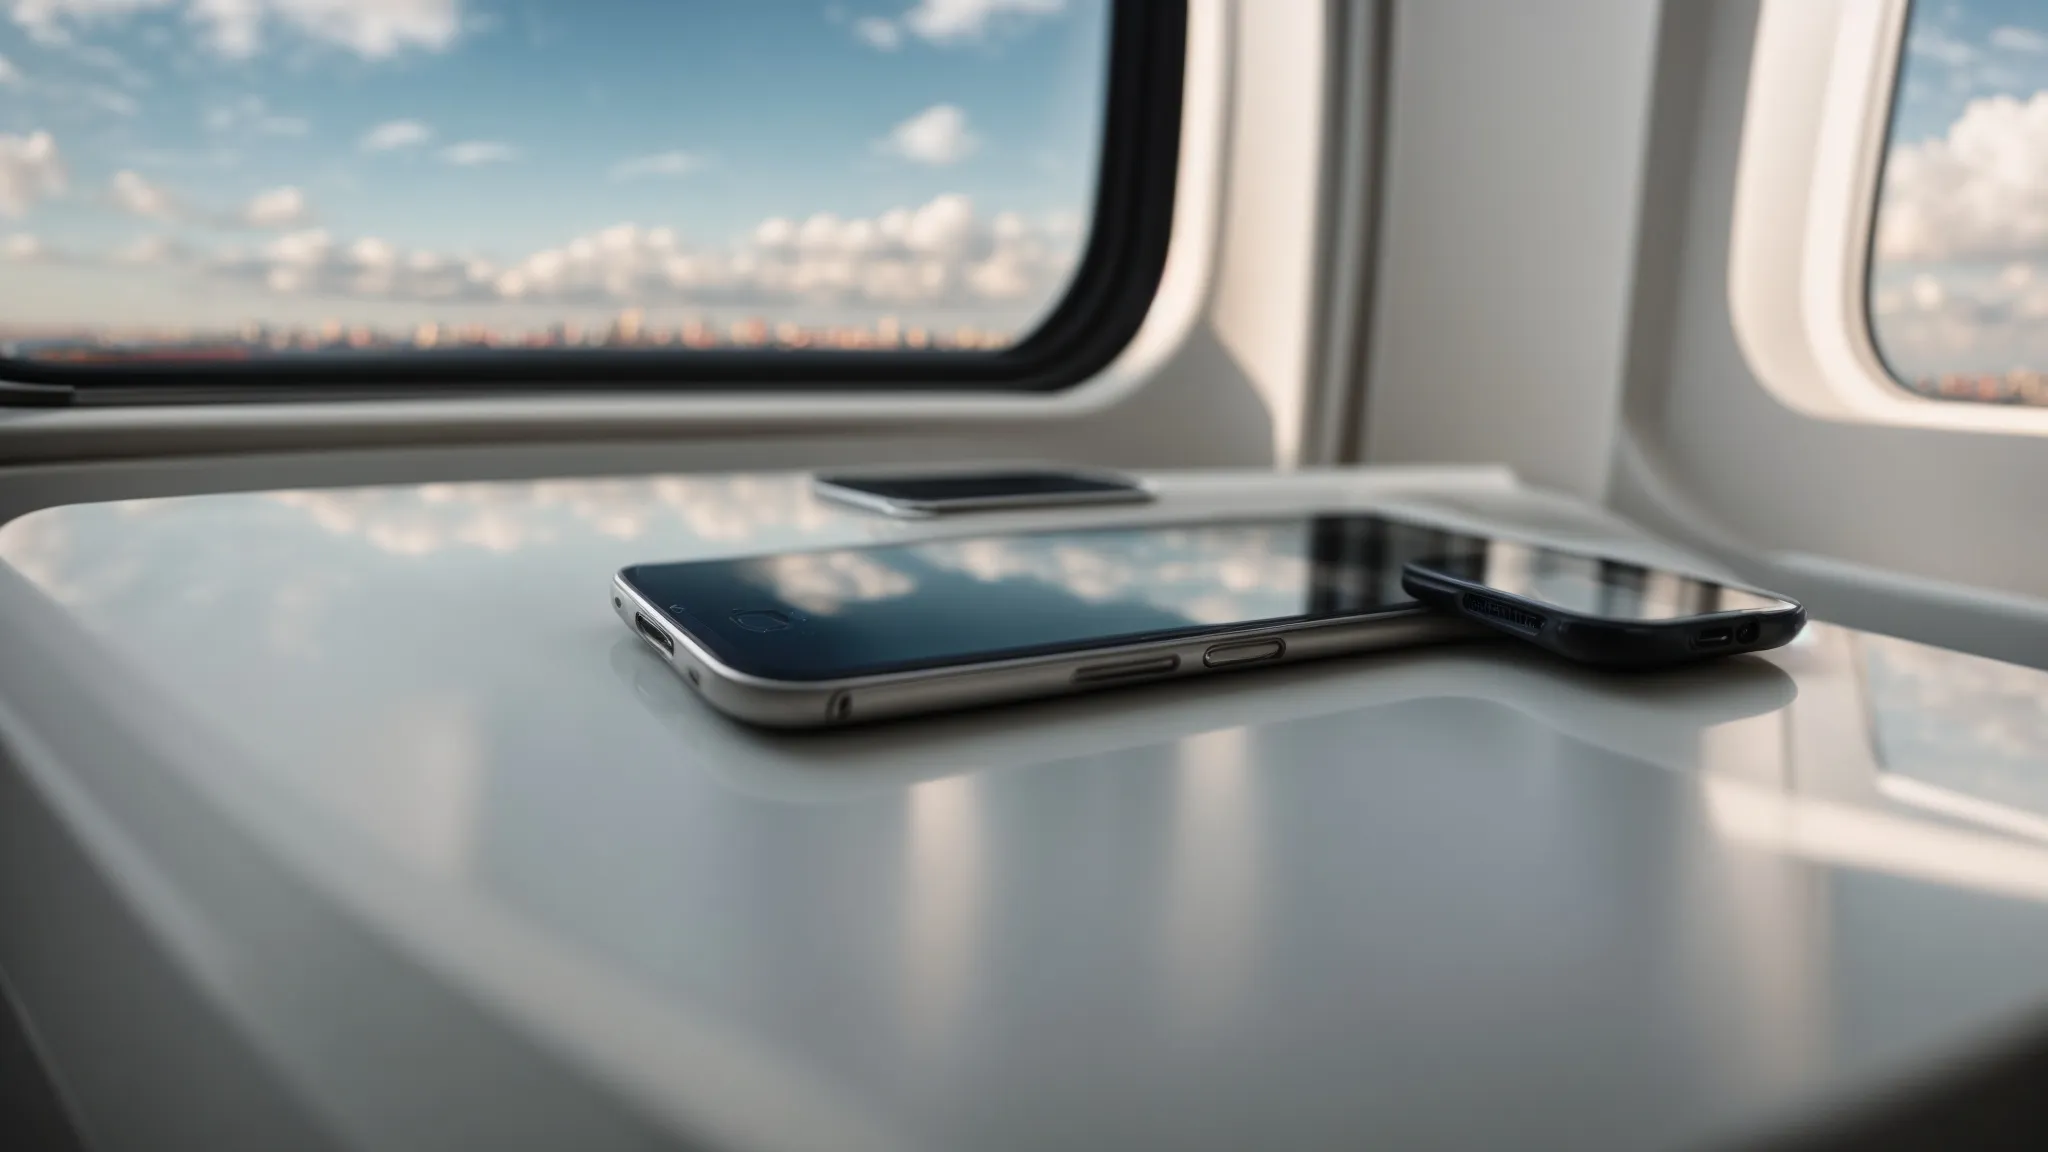 a smartphone lies on a tray table, next to a window offering a view of the clouds below, ready for airplane mode activation. Knowledge